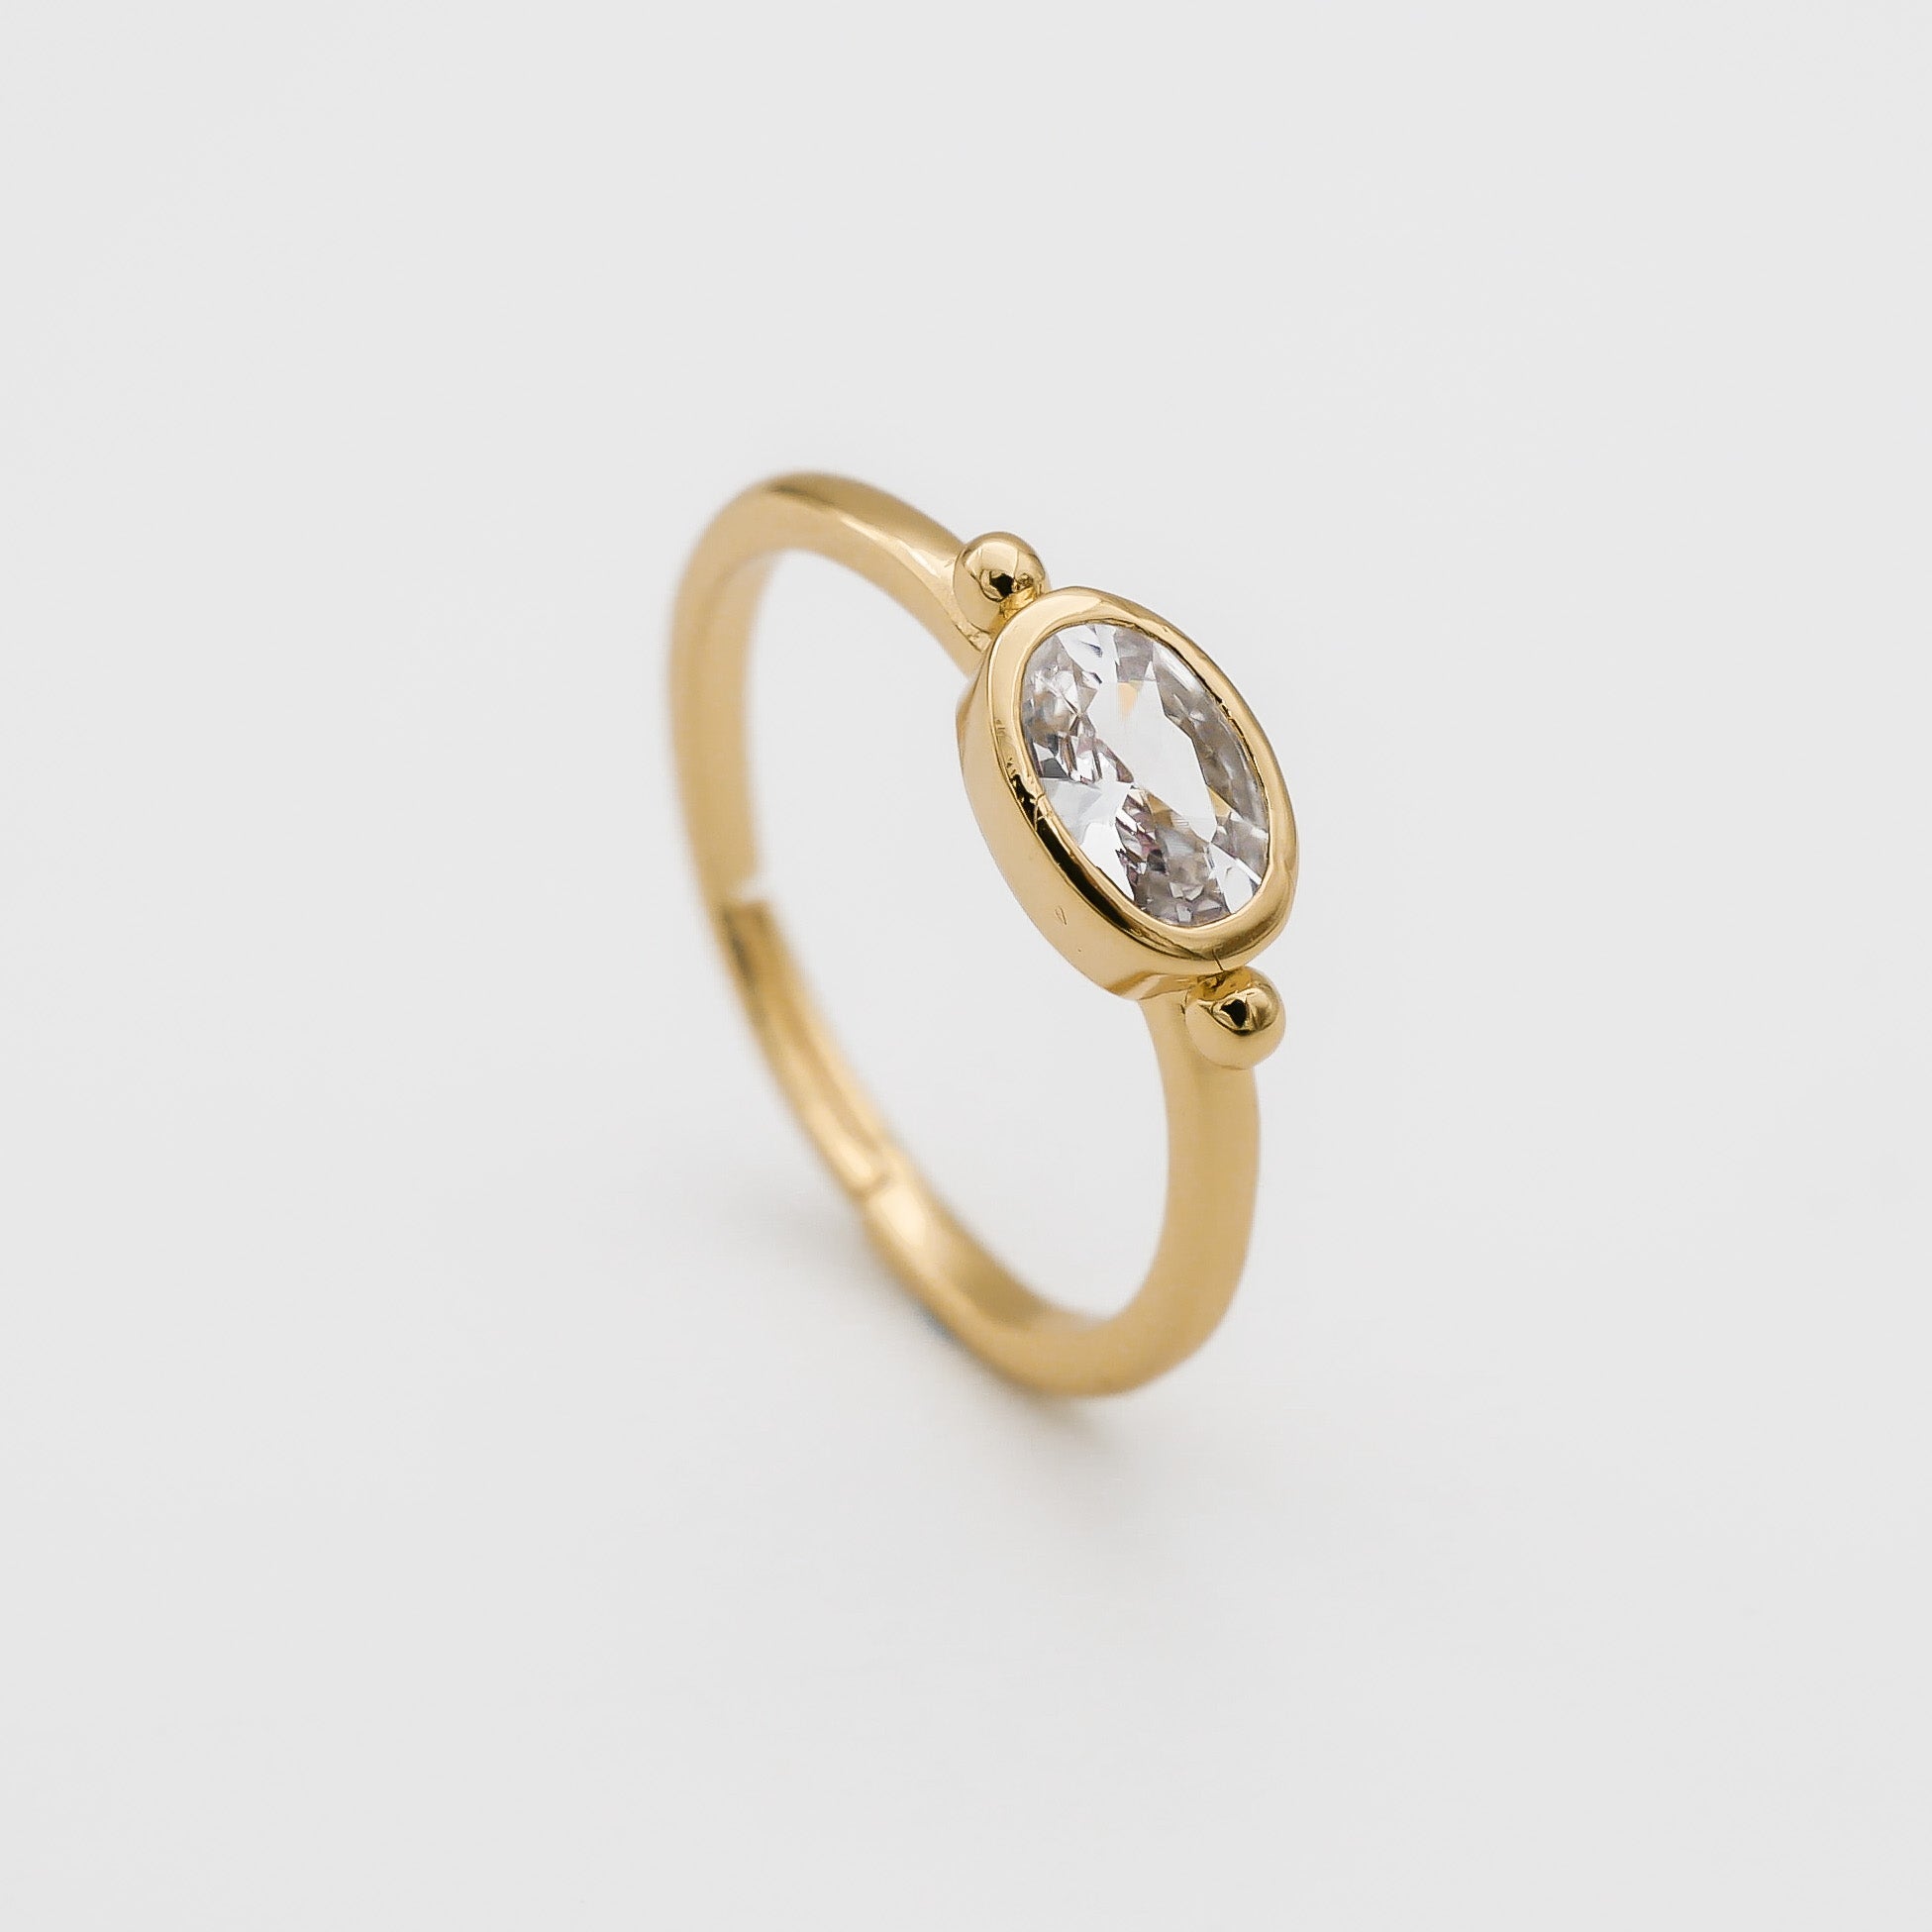 Birthstone ring gold for April with diamond